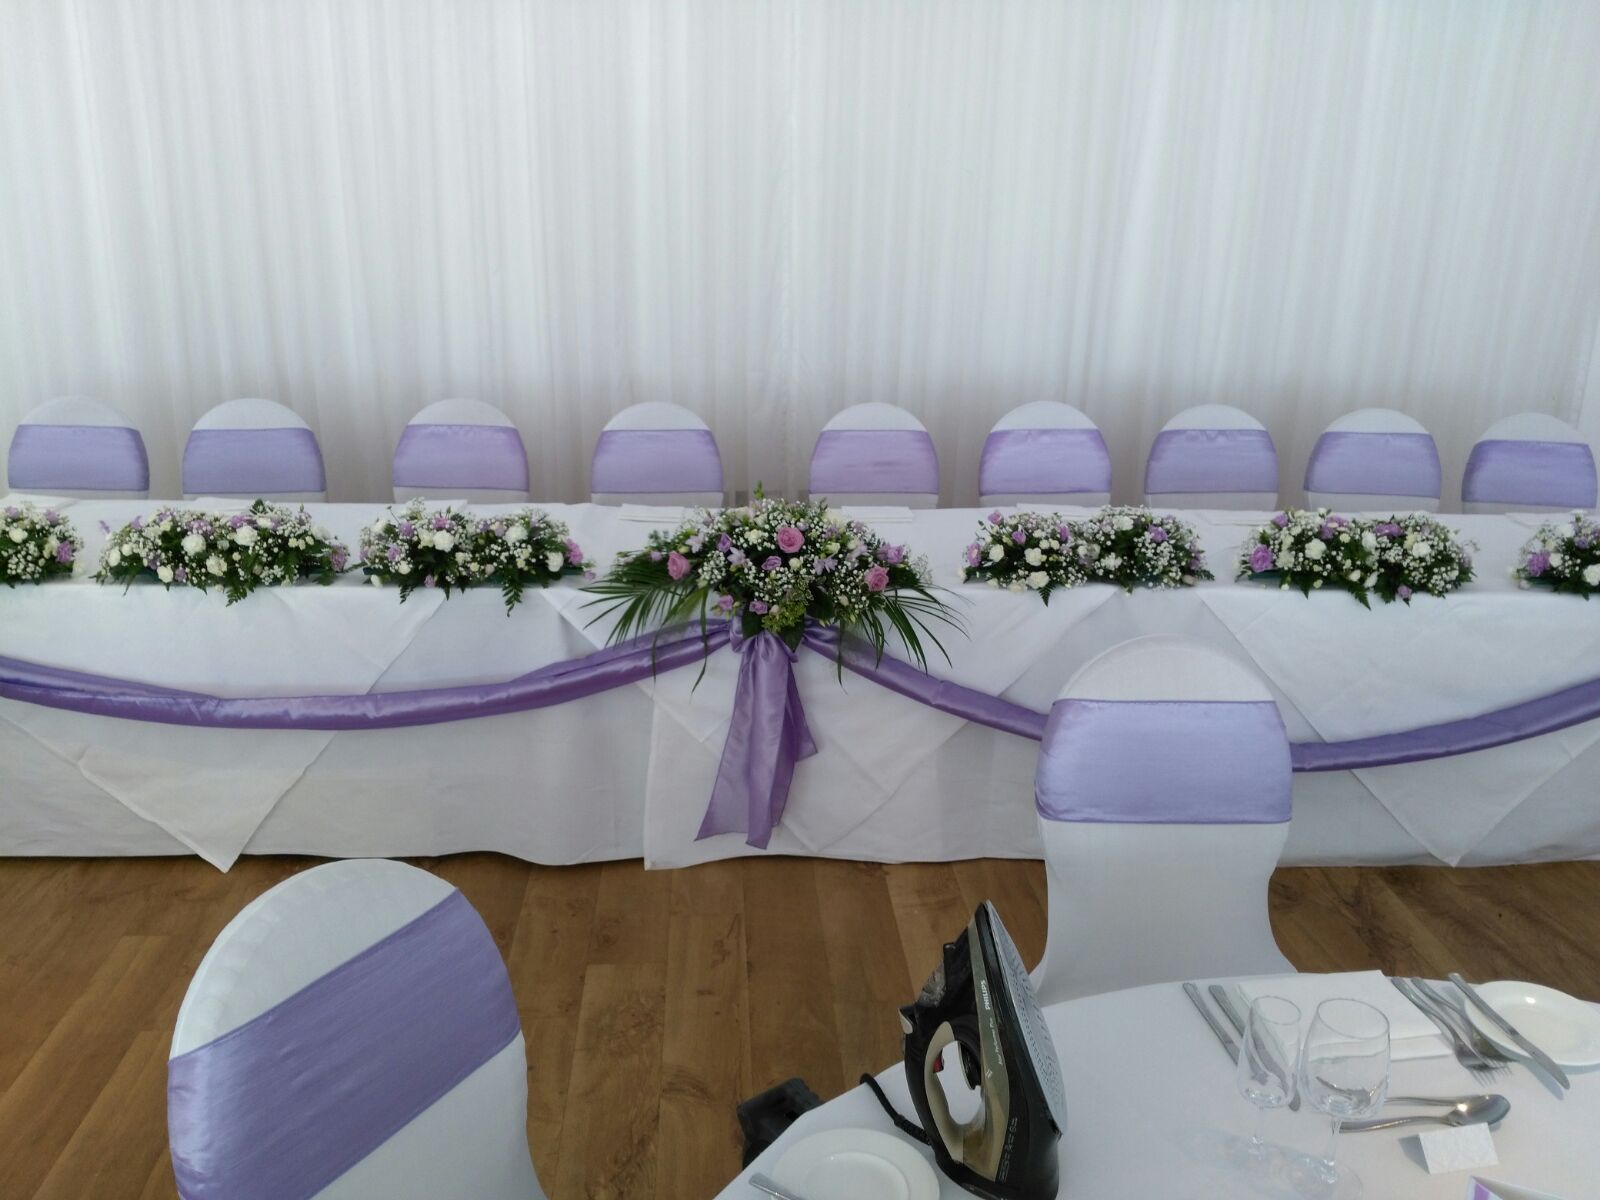 Top table with lilac swags and flowers